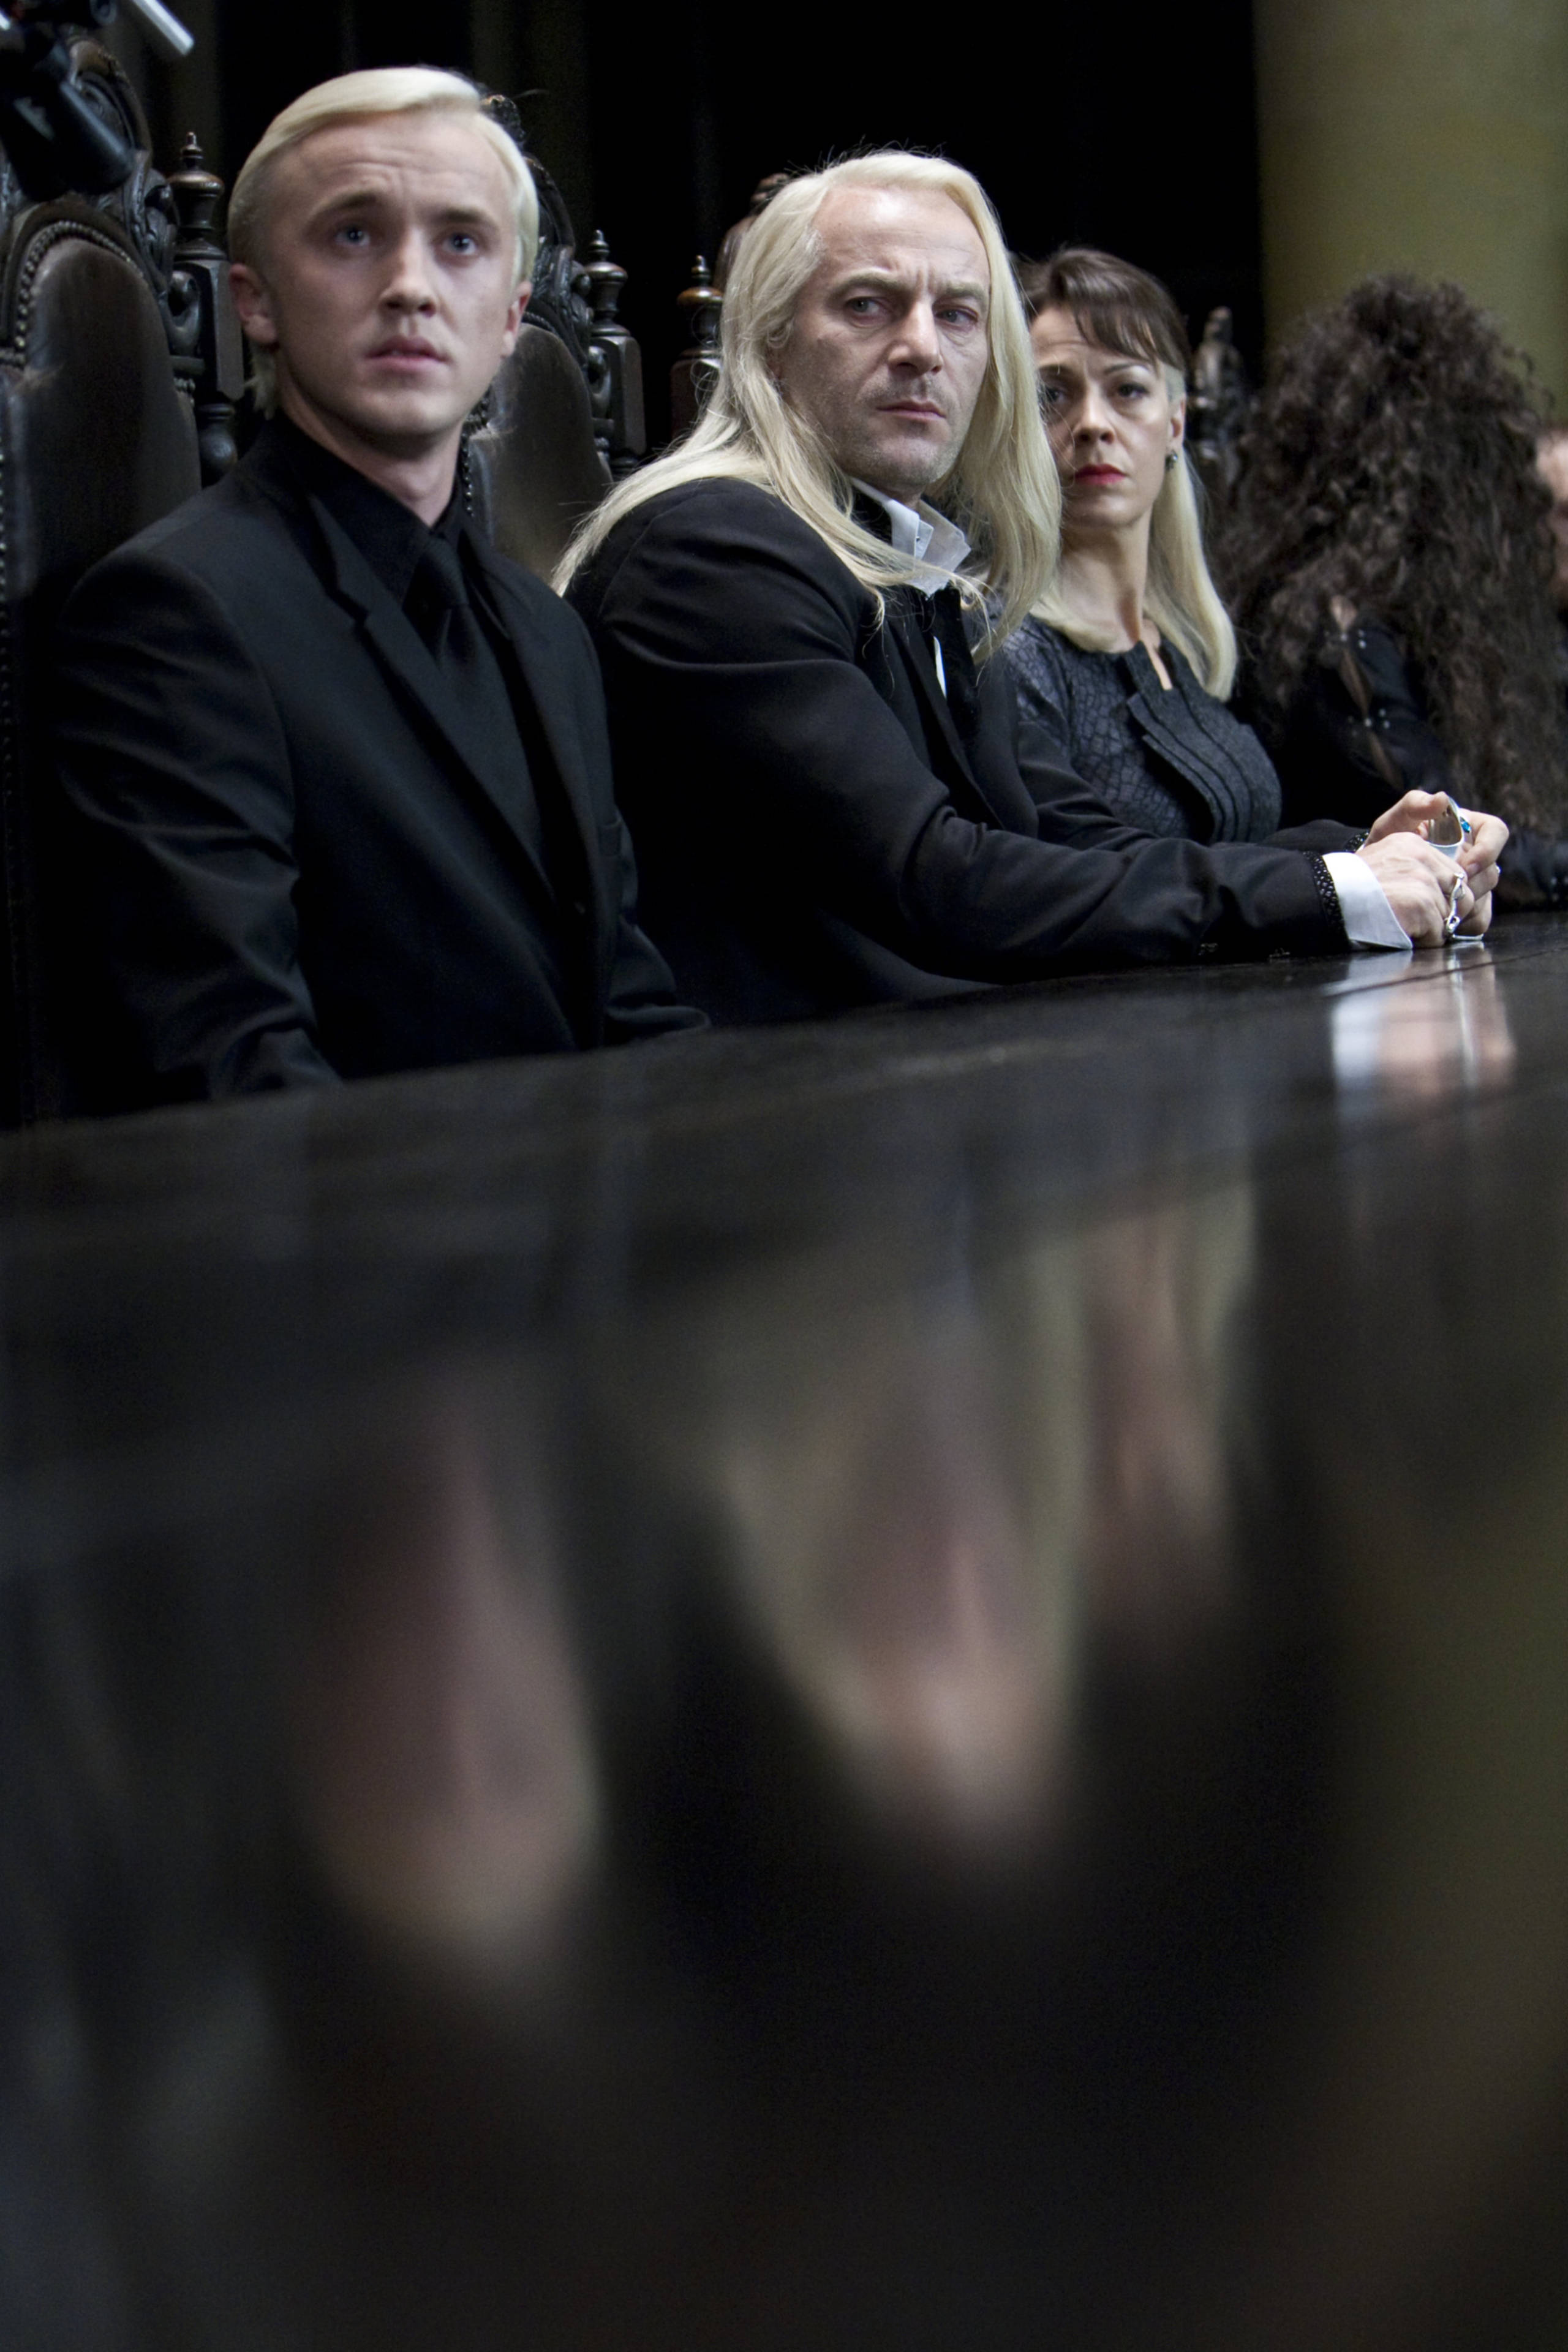 Lucius, Narcissa and Draco look scared at Voldemort's table in Malfoy Manor